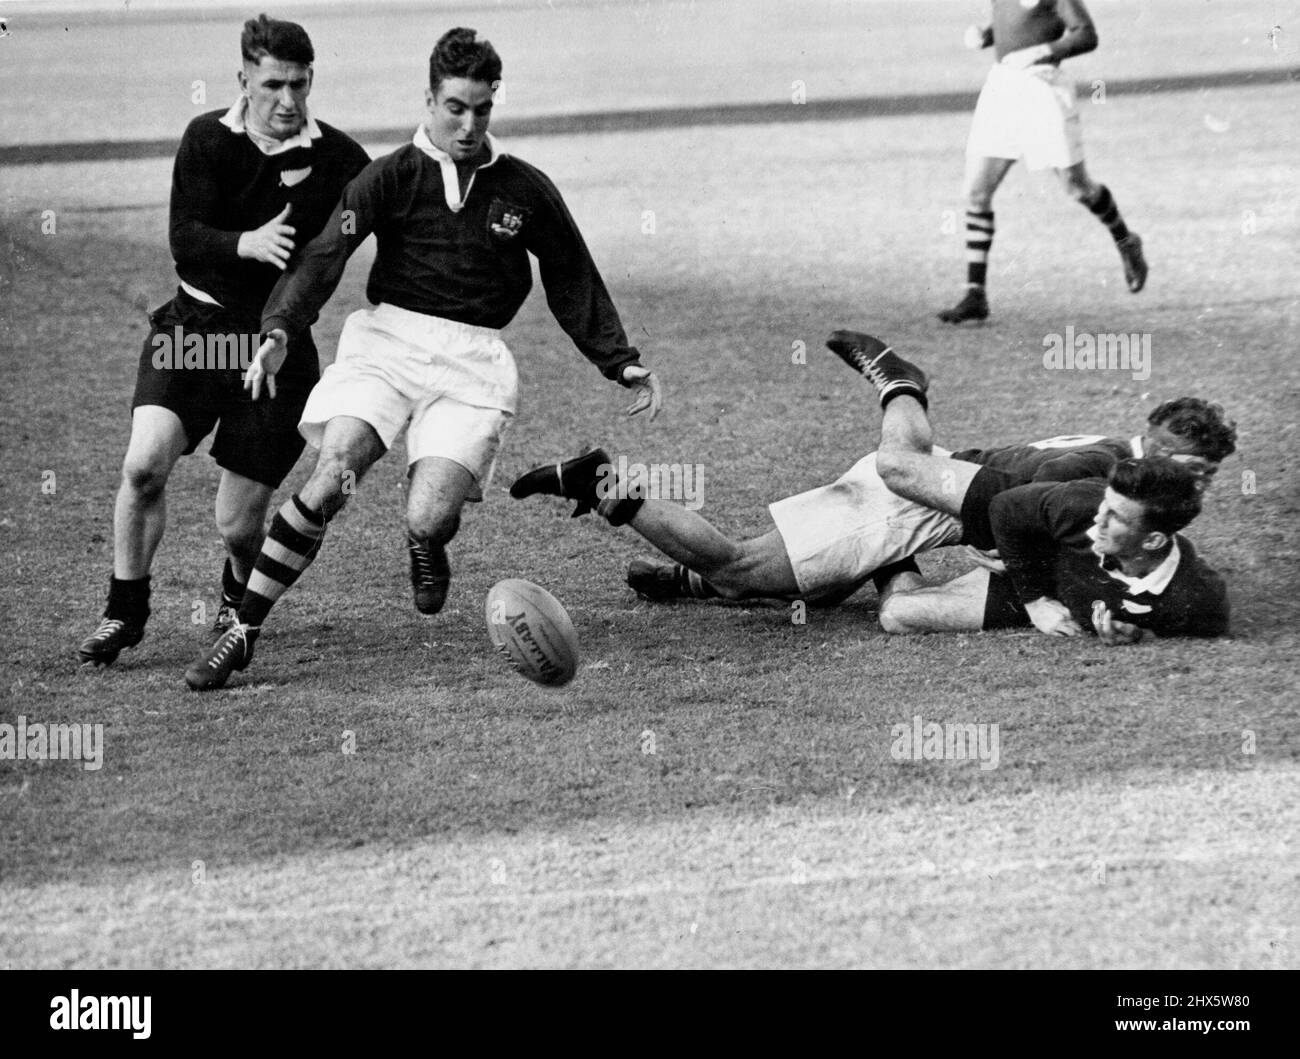 Lines for Rugby Union test pictures: No. 1 Rival centres Alan Walker (Aust White Shorts) (NZ) at left scrimmage for the ball. At inside centre, one favored position, Alan Walker races M. Goddard (NZ). July 01, 1947. Stock Photo